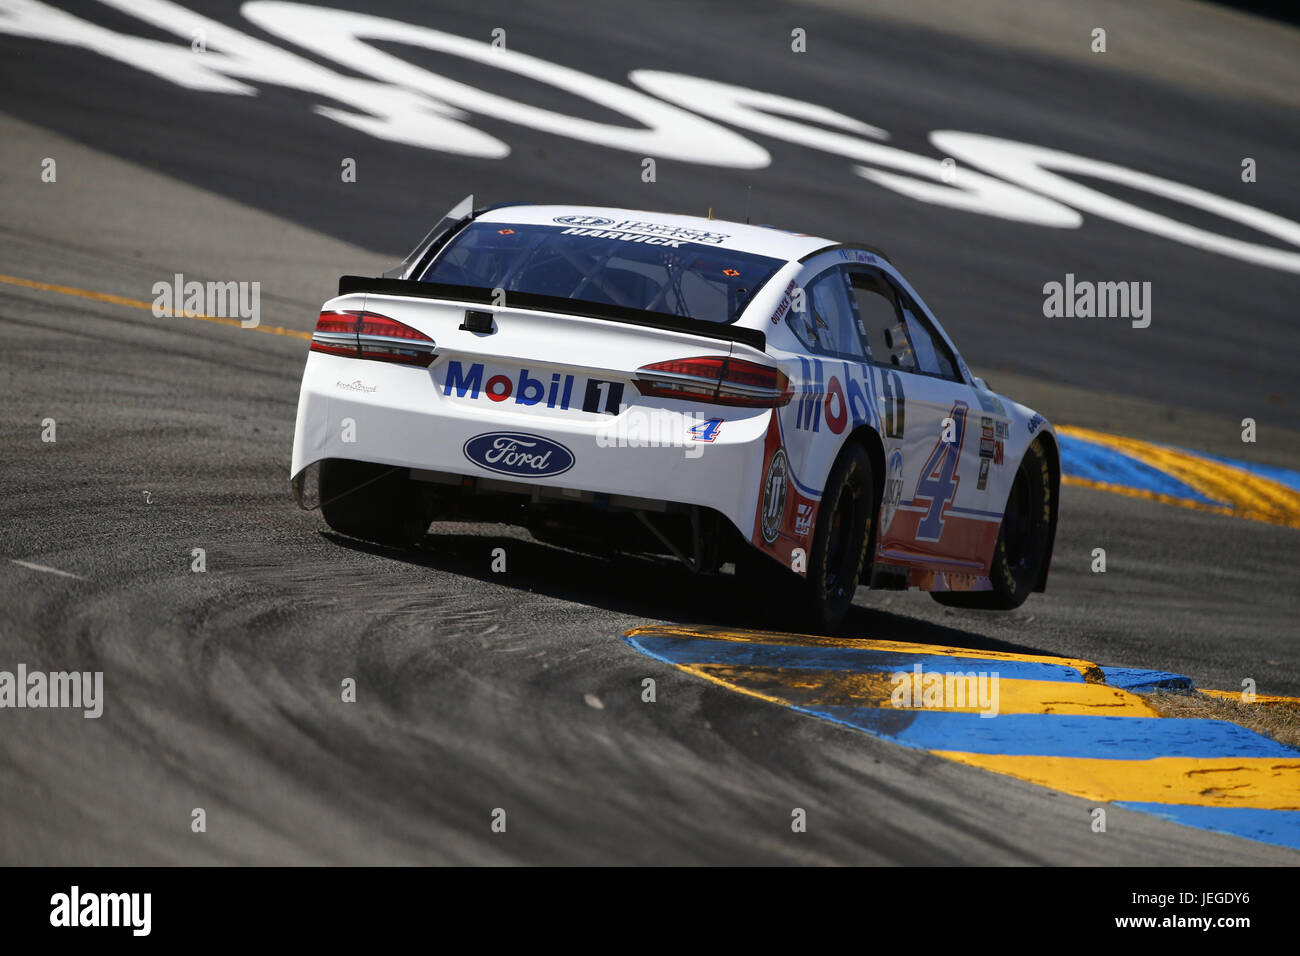 Sonoma, CA, USA. 23rd June, 2017. June 23, 2017 - Sonoma, CA, USA: Kevin Harvick (4) takes to the track to practice for the Toyota/Save Mart 350 at Sonoma Raceway in Sonoma, CA. Credit: Justin R. Noe Asp Inc/ASP/ZUMA Wire/Alamy Live News Stock Photo